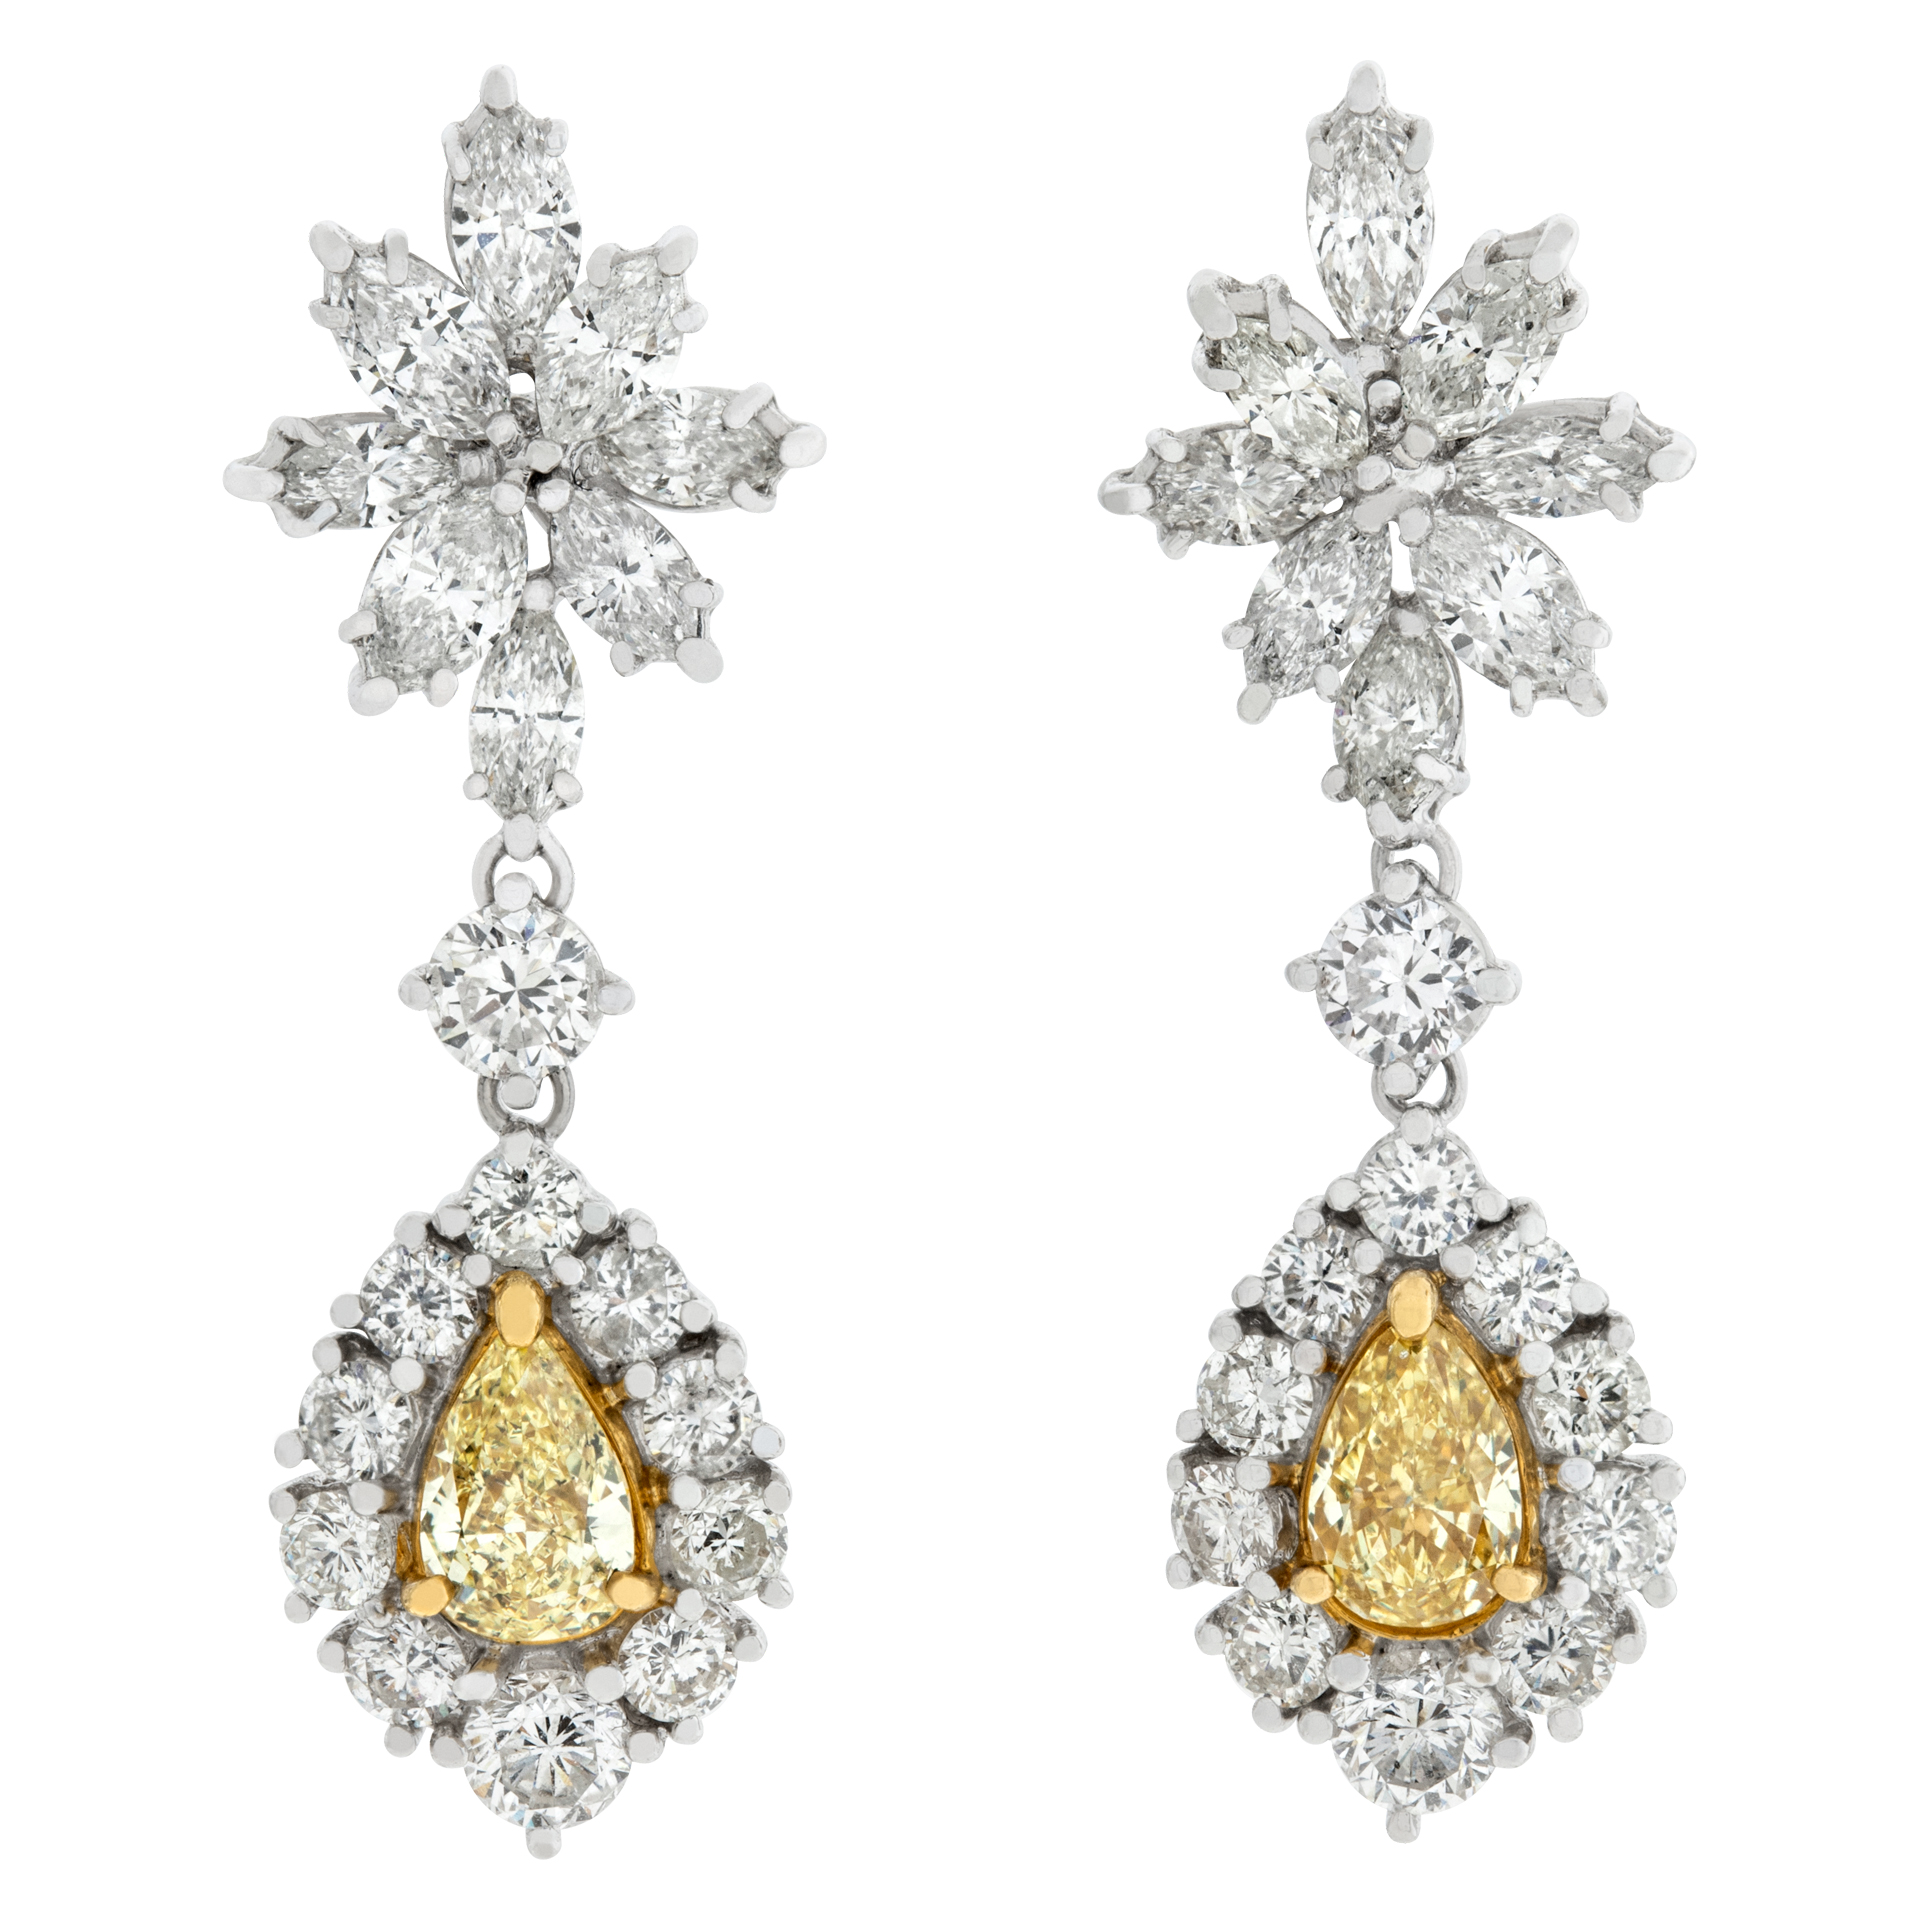 18k white gold earrings with 4.56 cts in white diamonds and 1.27 cts in fancy yellow diamonds